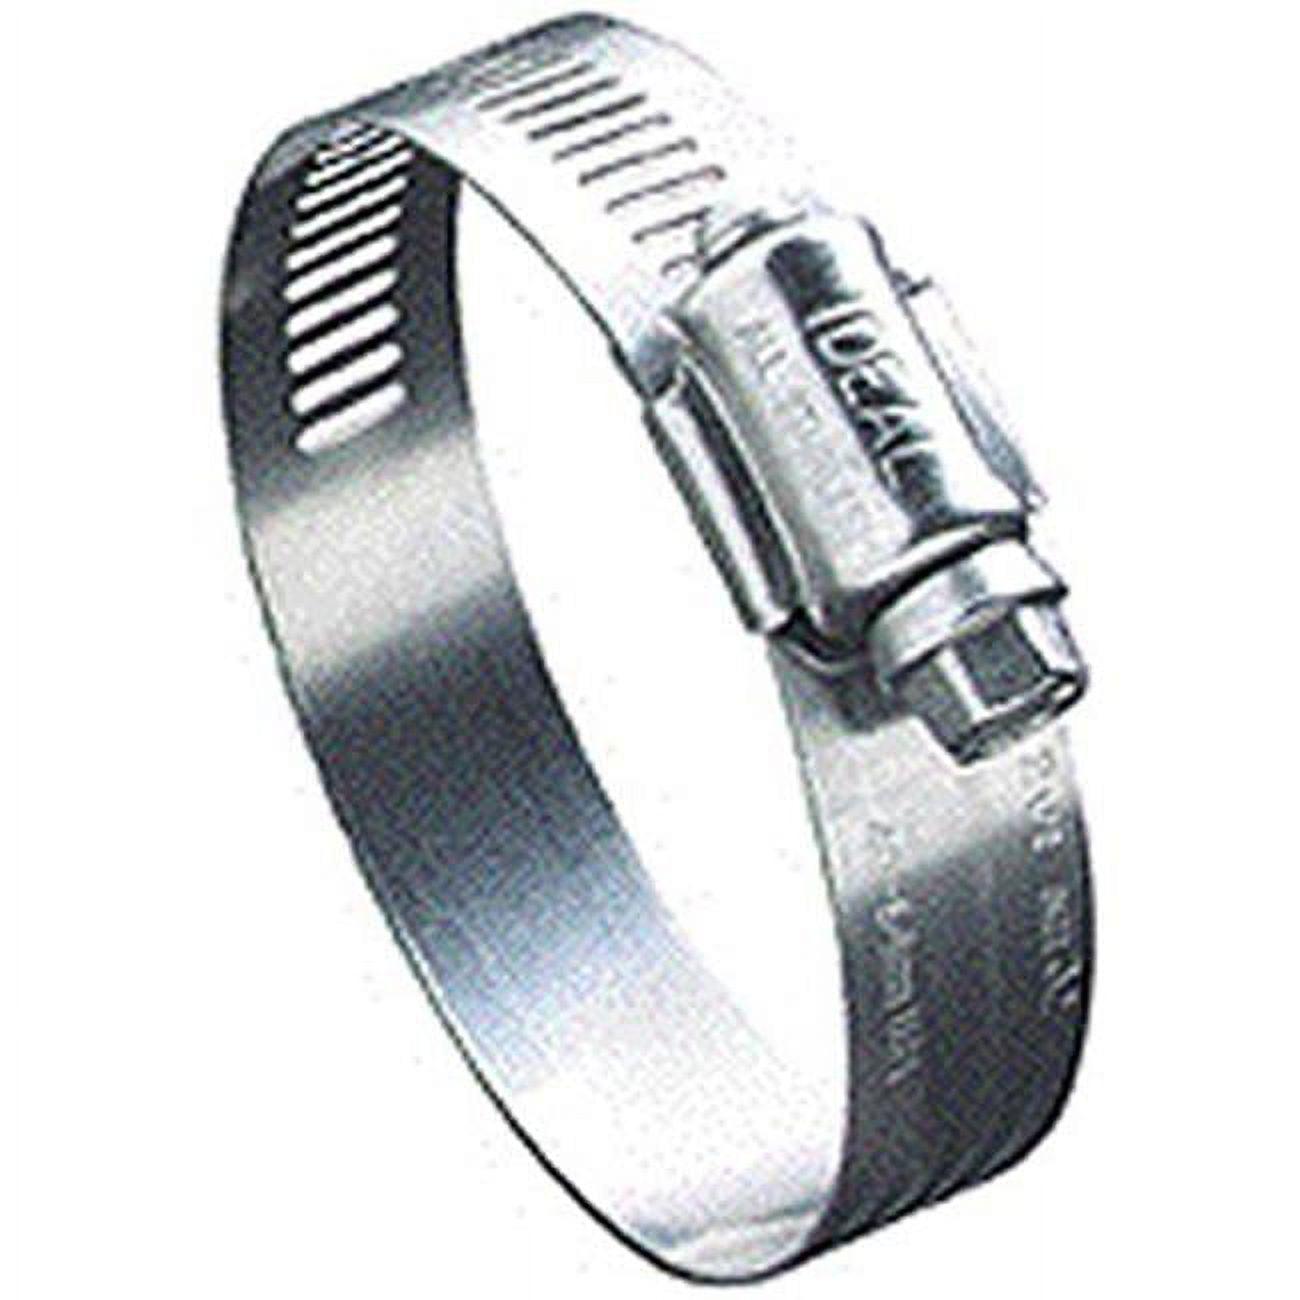 6828053 1.31 X 2.25 In. Stainless Steel Hose Clamp - Pack Of 10